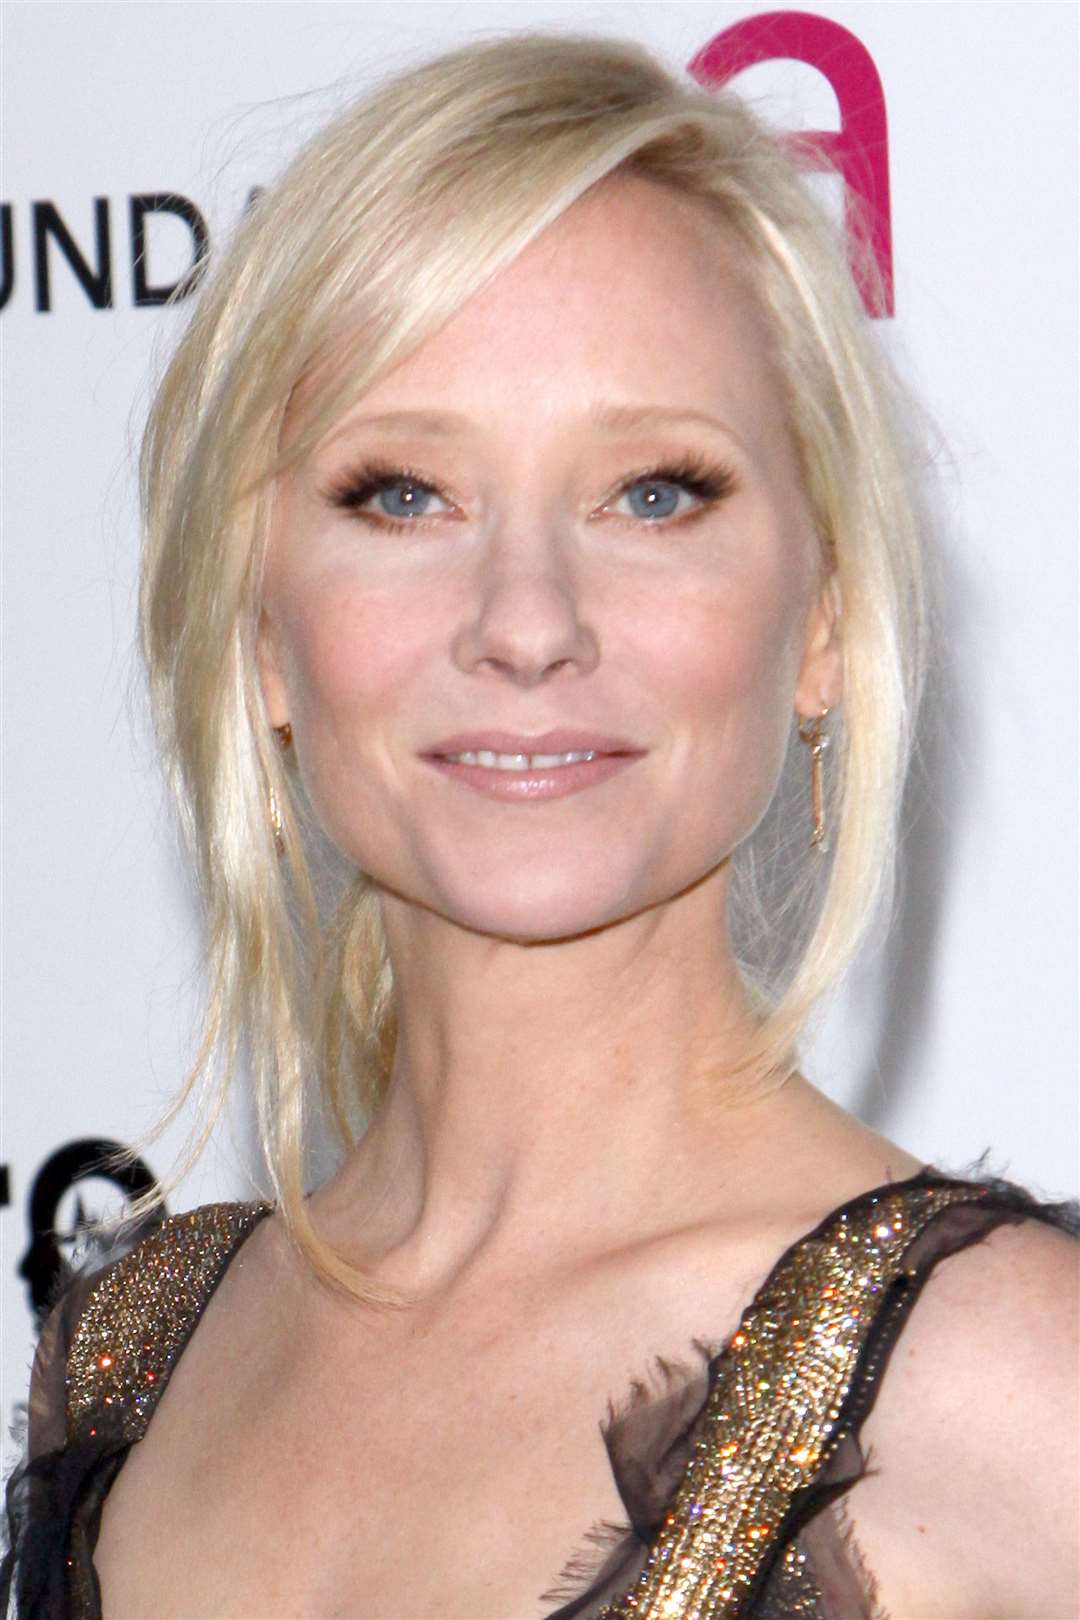 The Hollywood actress Anne Heche was “peacefully taken off life support” nine days after suffering a brain injury in a car crash (Tony Di Maio/PA)